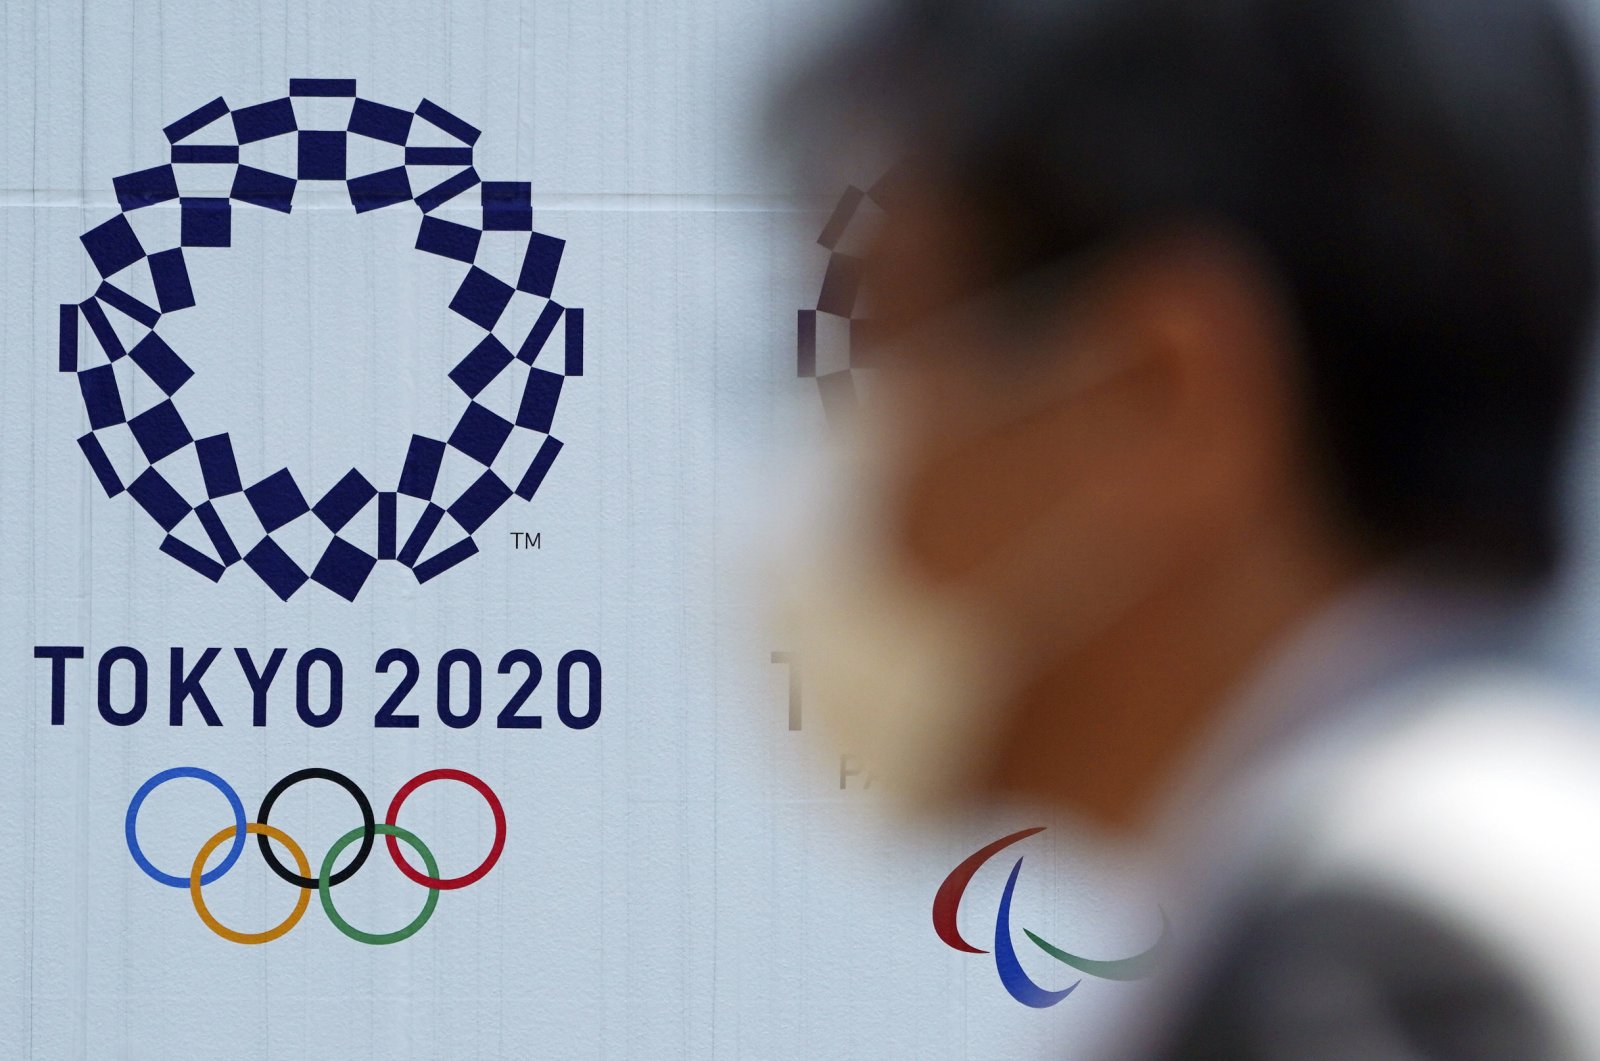 A man wearing a face mask walks near the logo of the Tokyo 2020 Olympics, in Tokyo, April 2, 2020. (AP Photo)